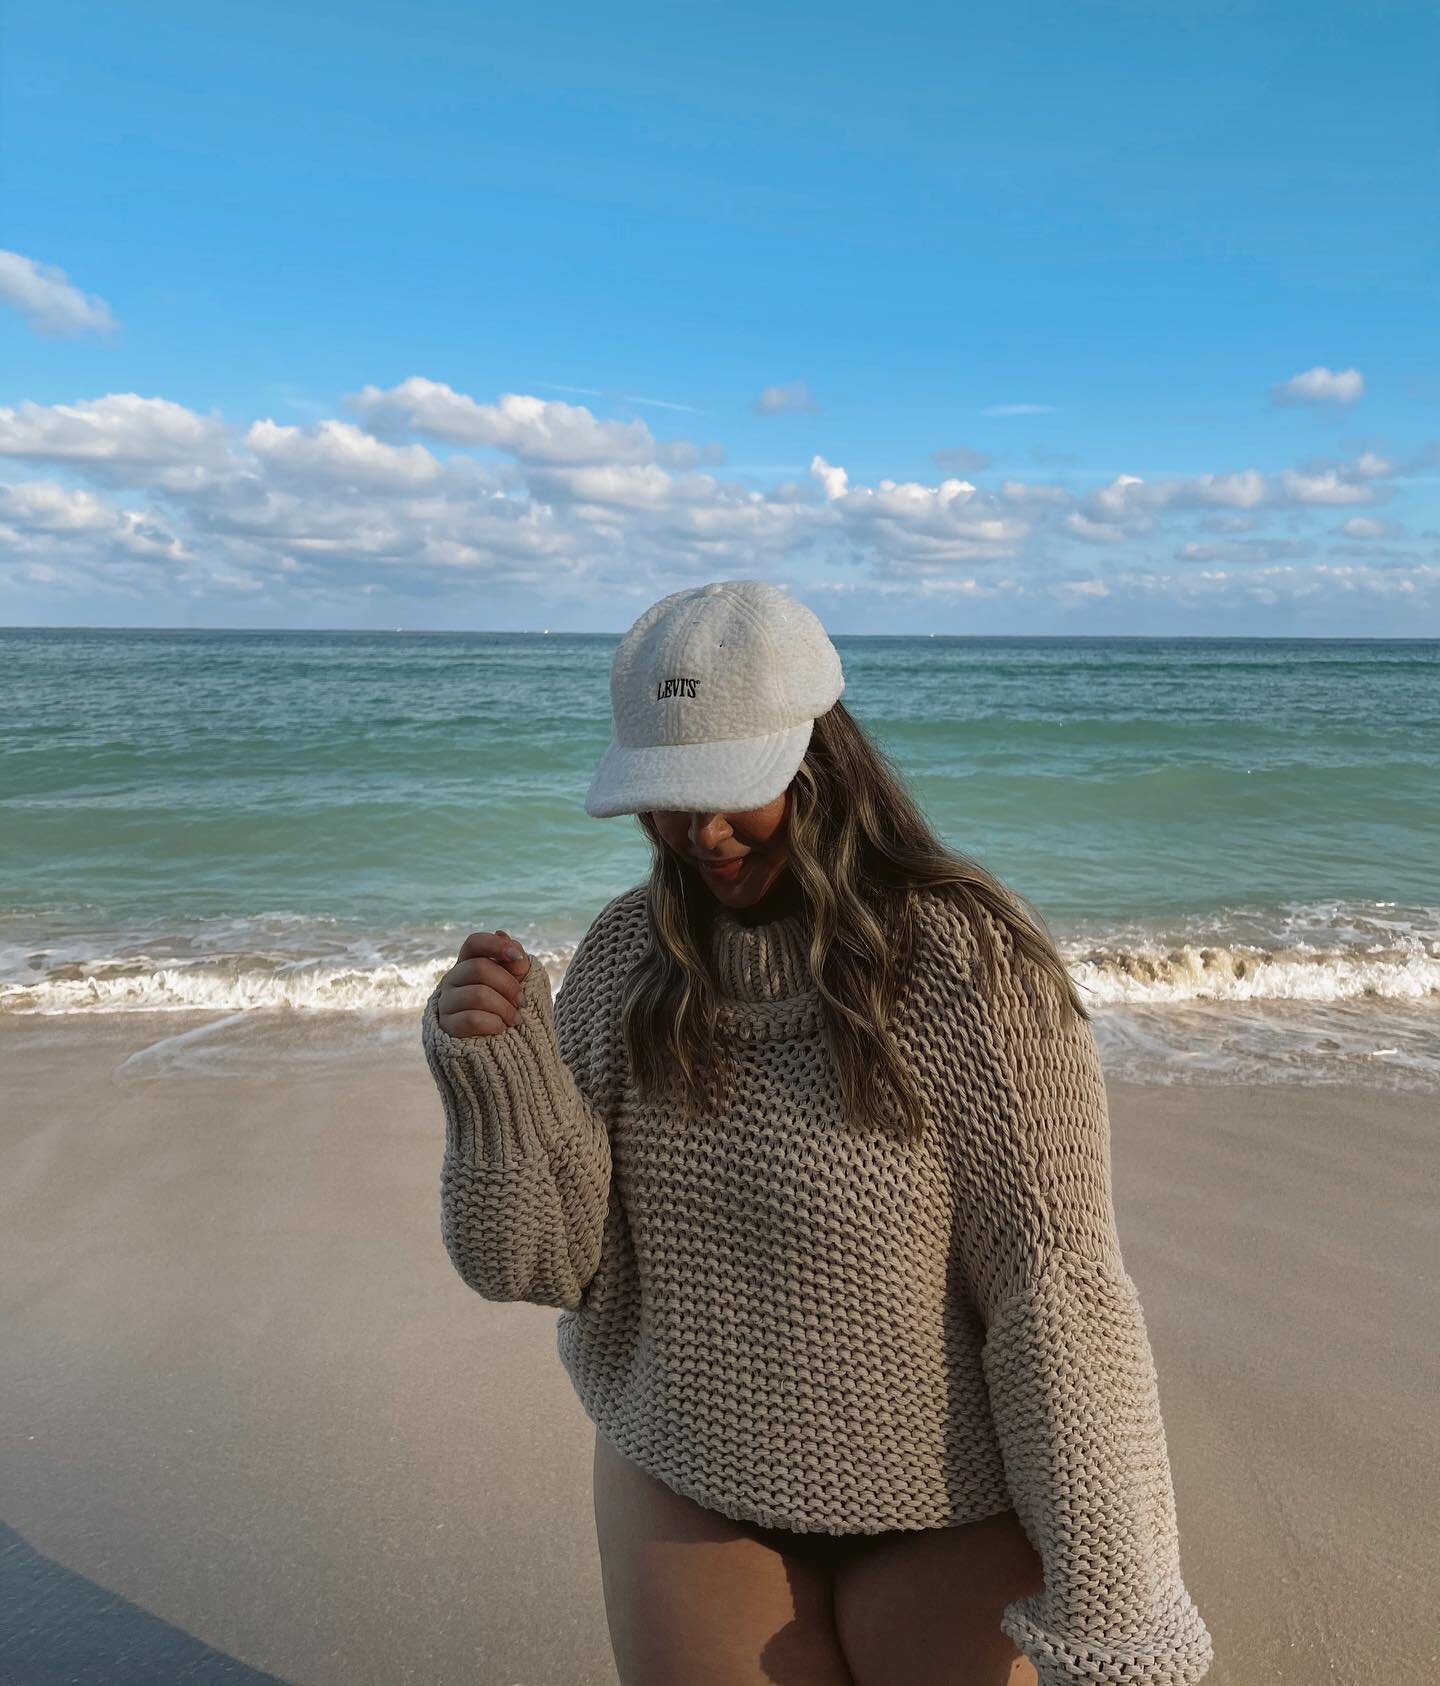 The smell of salt water &amp; the sound of crashing waves is therapy for the soul 🌊🤍

This @freepeople sweater has been one of my favorite sweater purchases EVER. 

I&rsquo;ve styled it in so many different ways this season - a new staple in my war